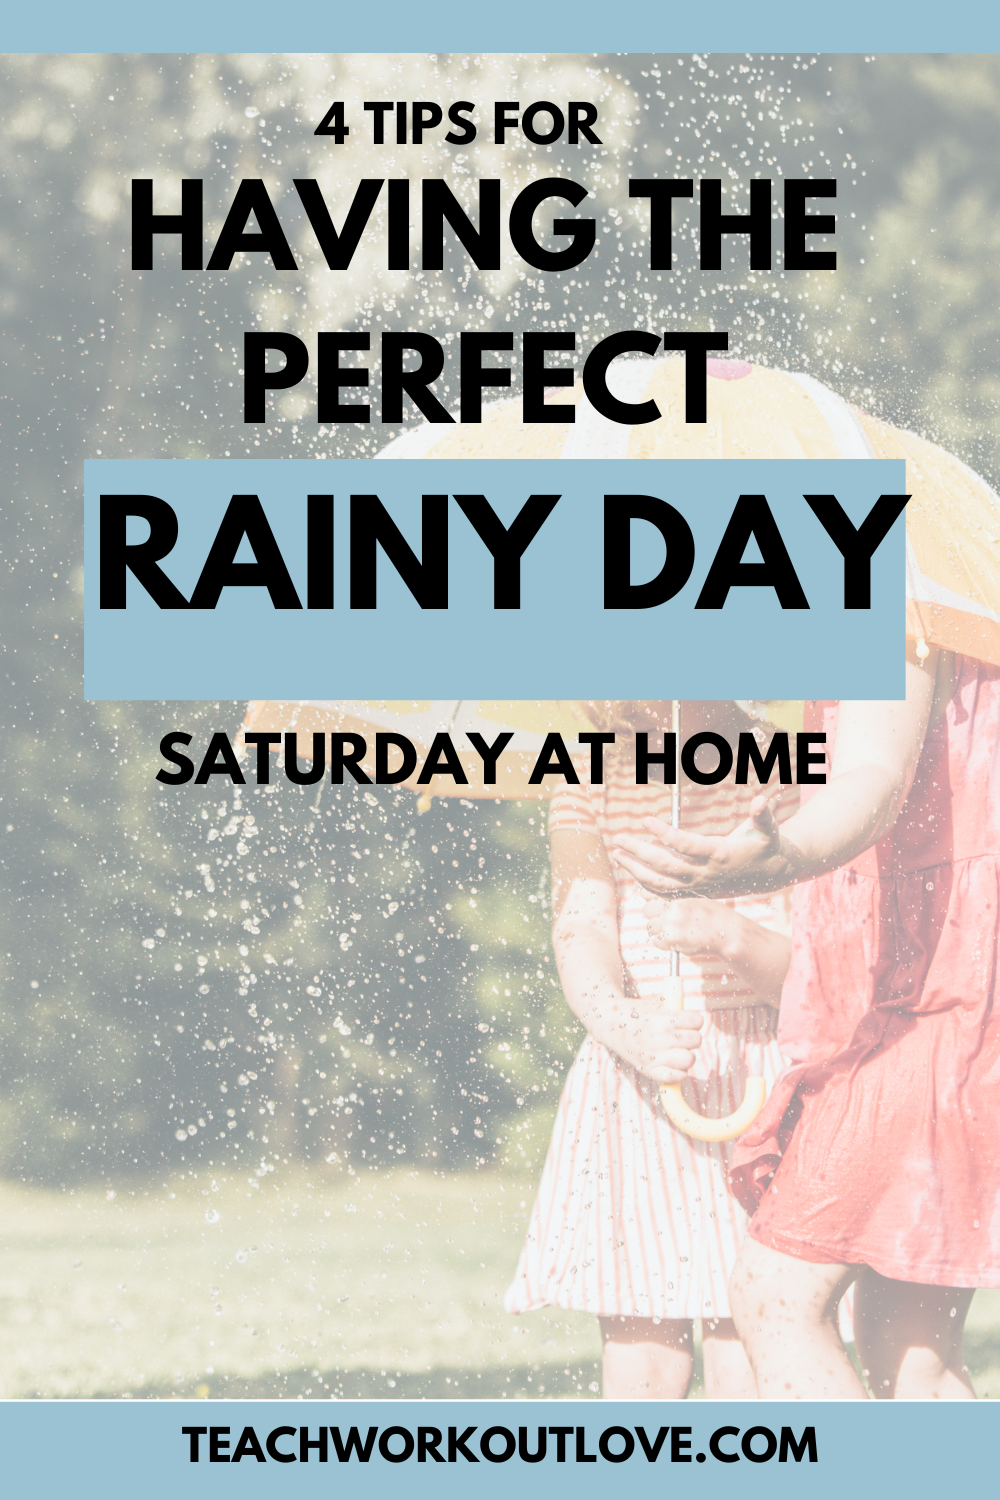 Saturday is most likely your favorite day of the week, so it’s important to make the most of it, no matter what’s going on with the weather, and even if you have to stay inside. Follow these tips to take full advantage of your rainy day at home.